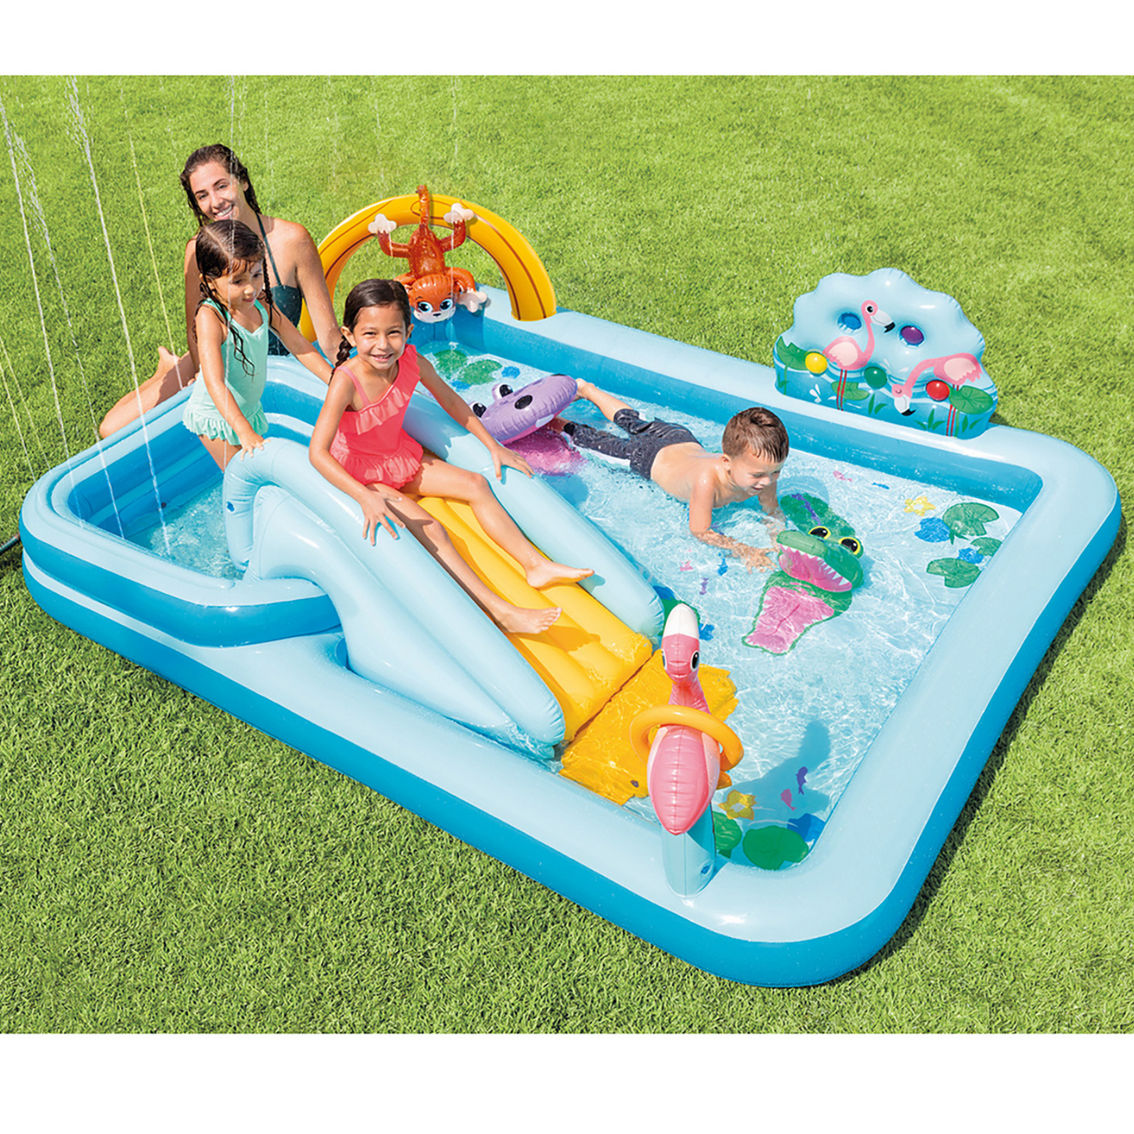 Intex Jungle Adventure Inflatable Pool Play Center - Image 2 of 7